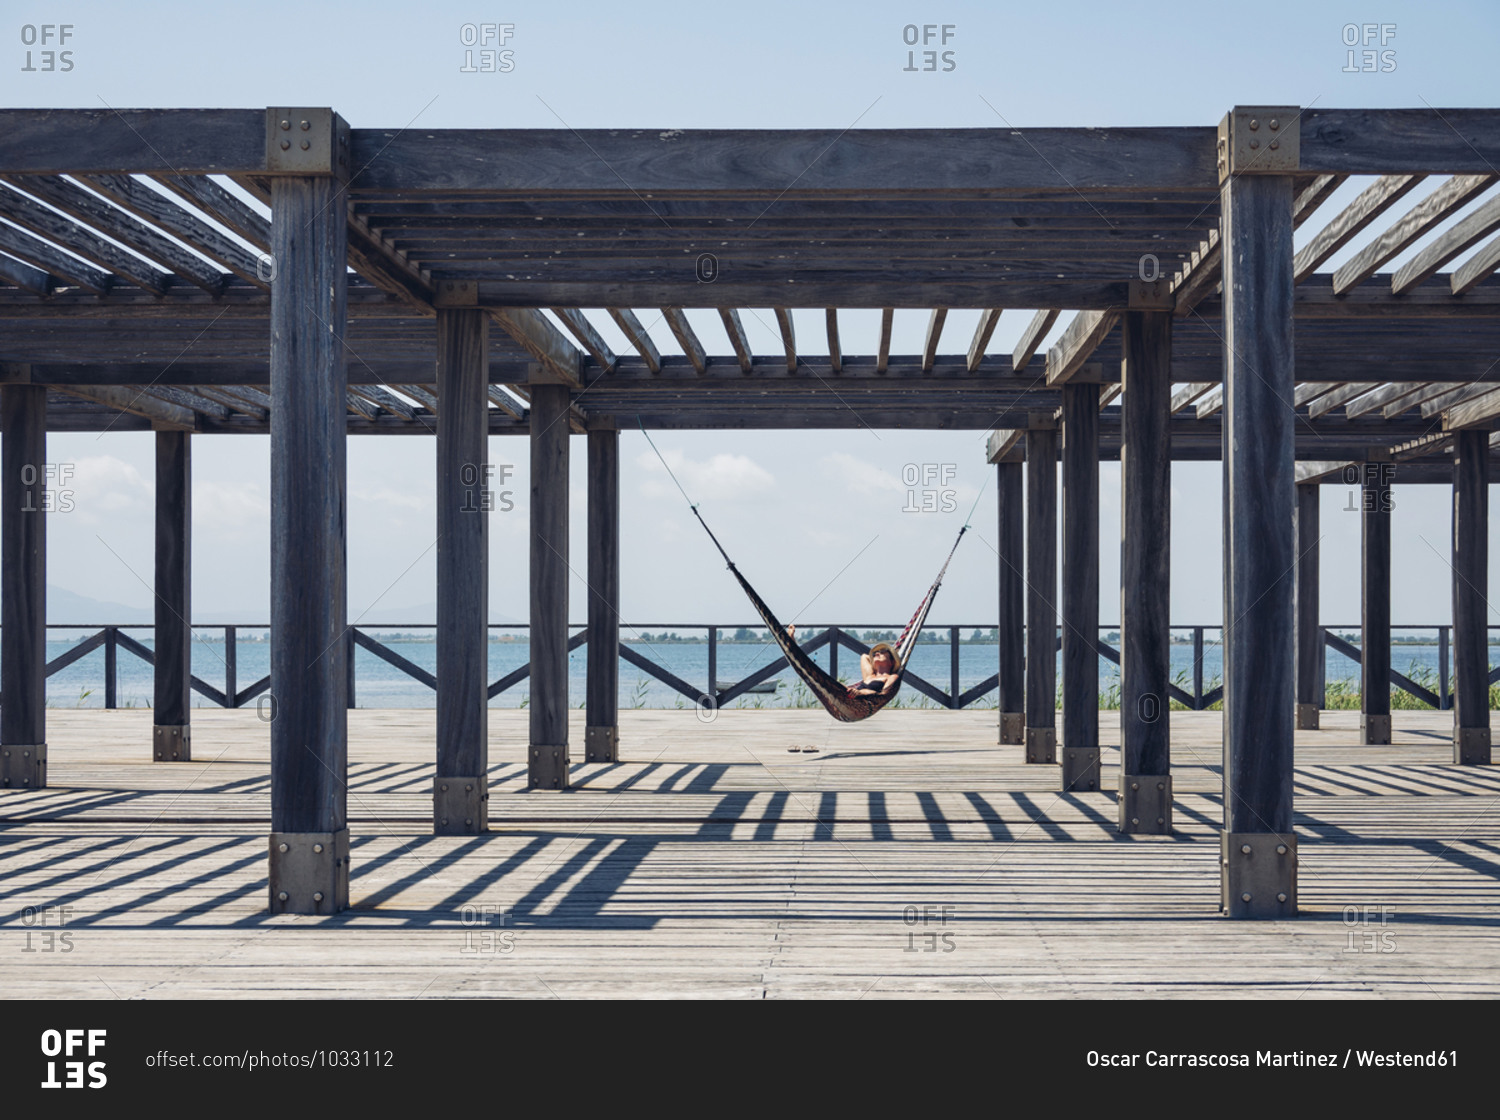 Woman lying in hammock hanging from metallic structure on boardwalk during sunny day